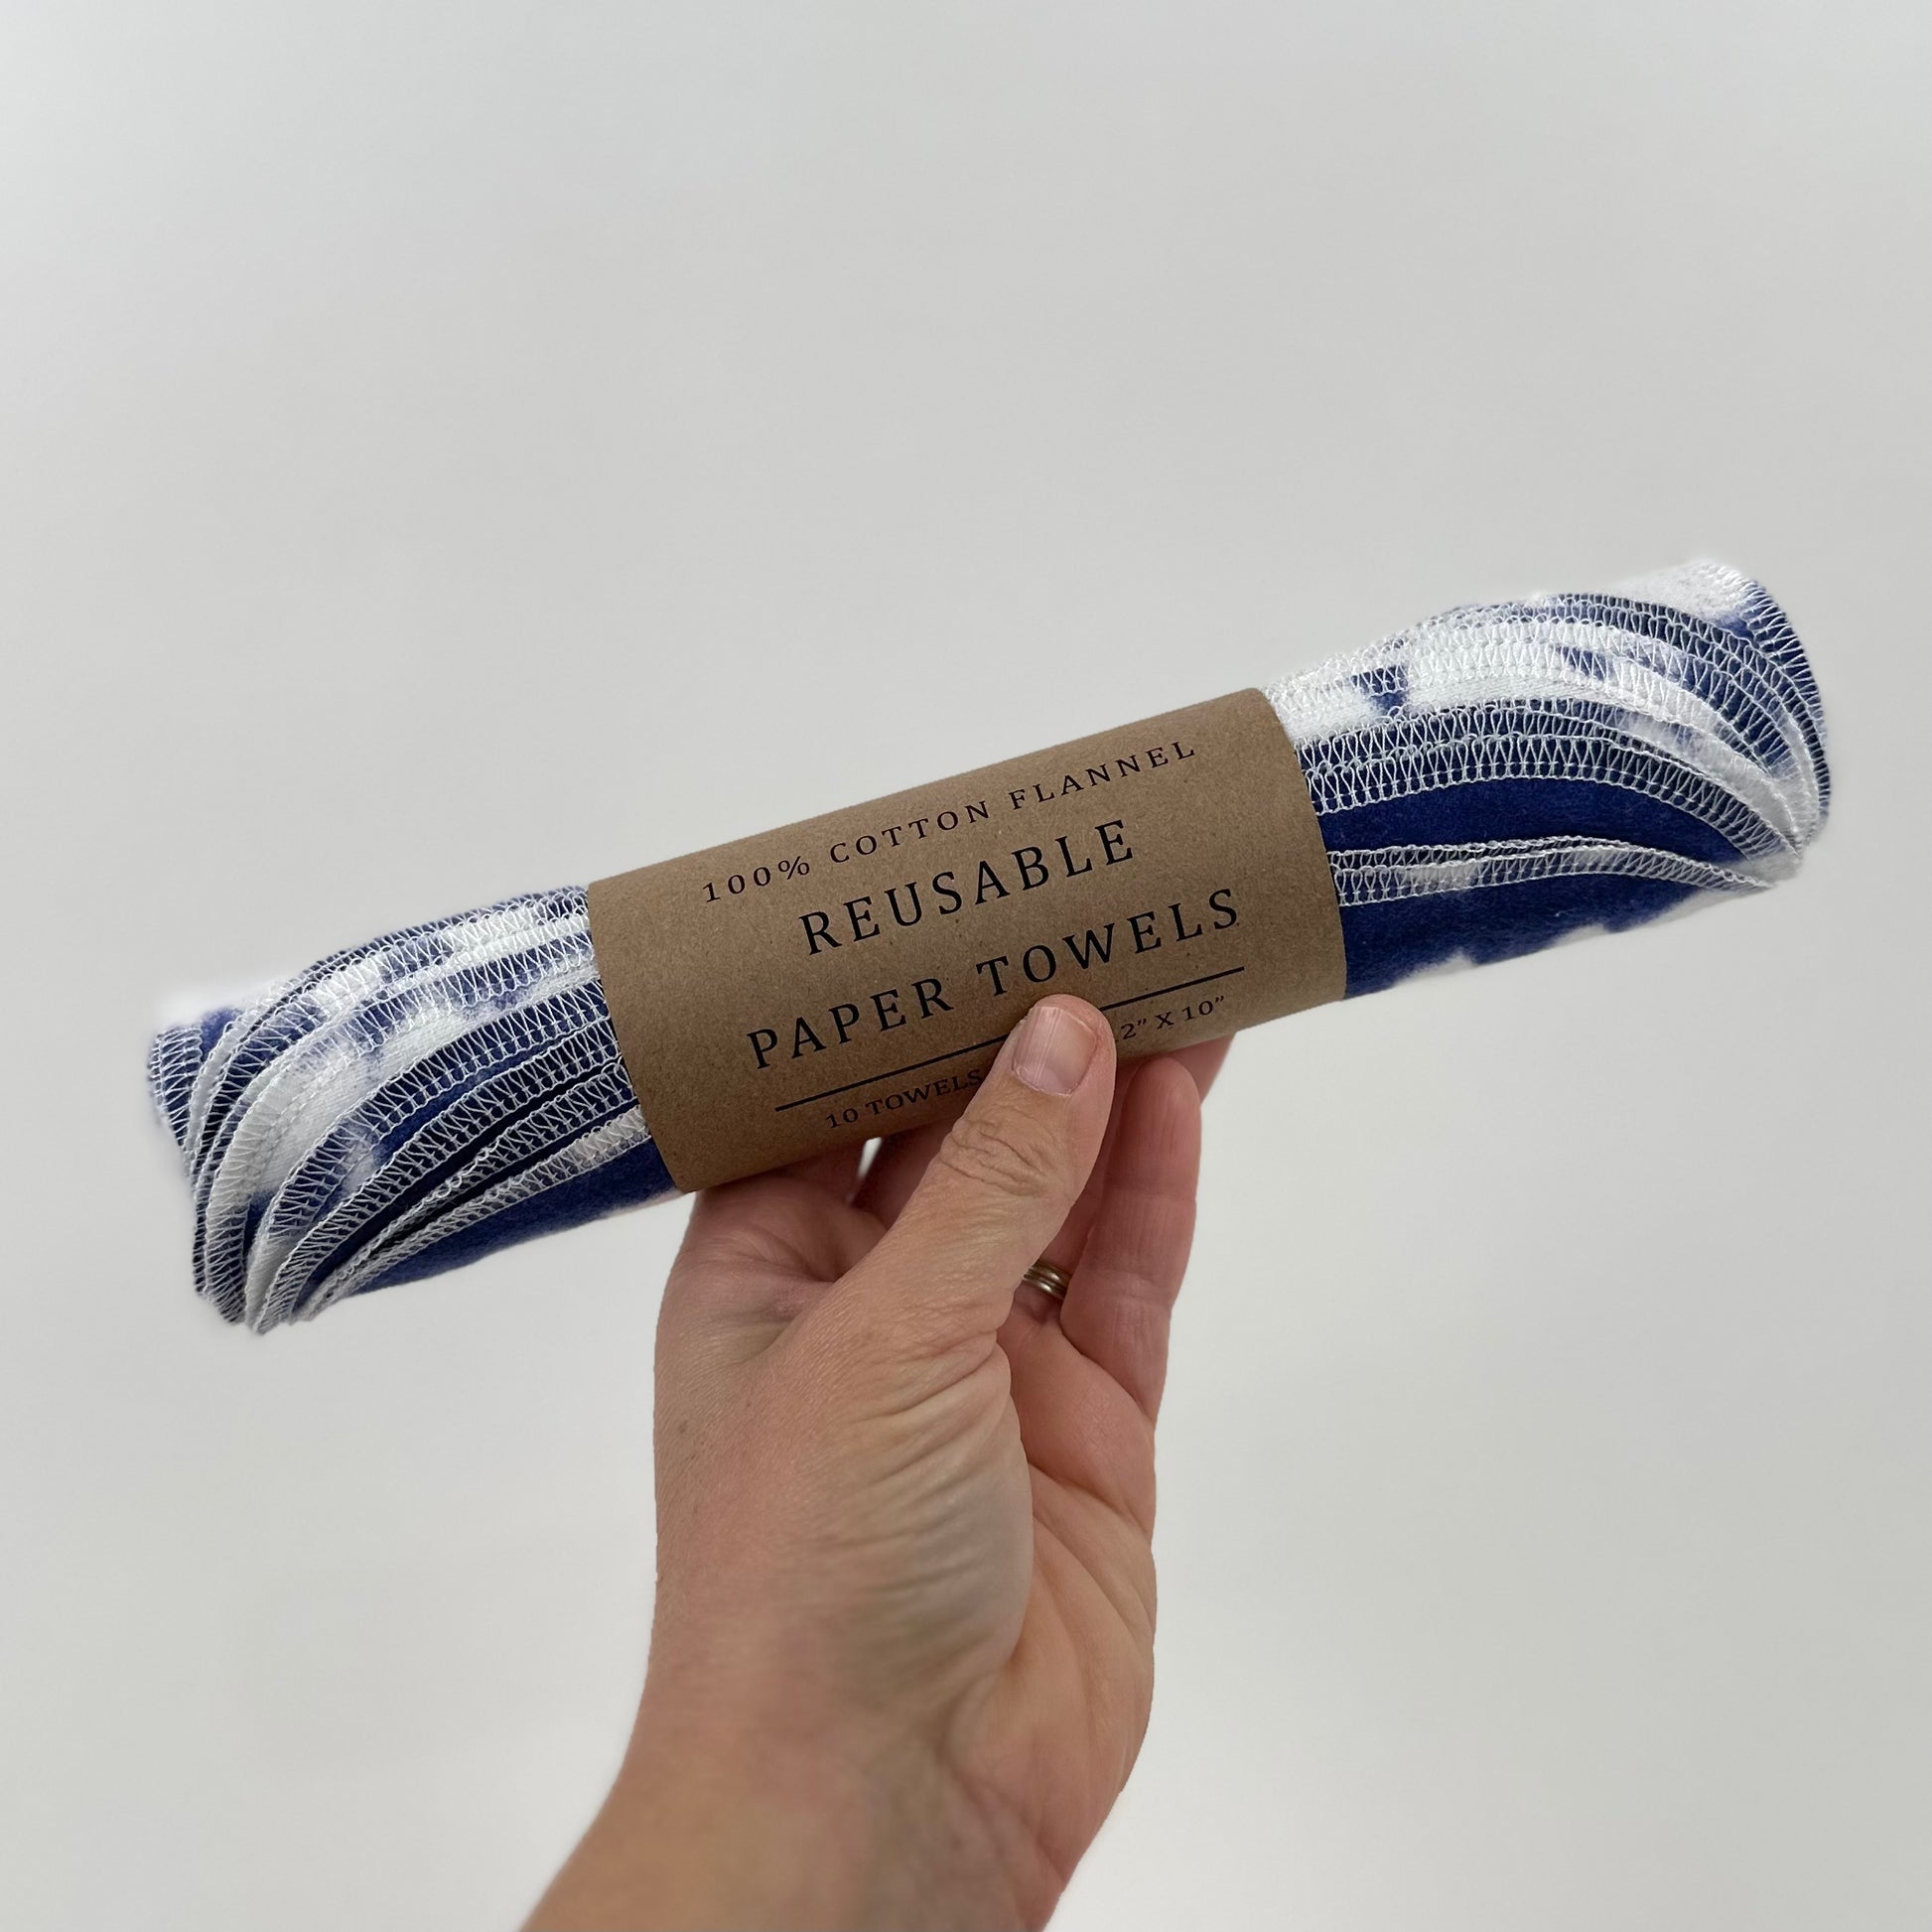 A roll of felt reusable paper towels printed deep blue indigo stripes that appear to be tie dyed - part of the Miche Niche Reusable paper towel collection